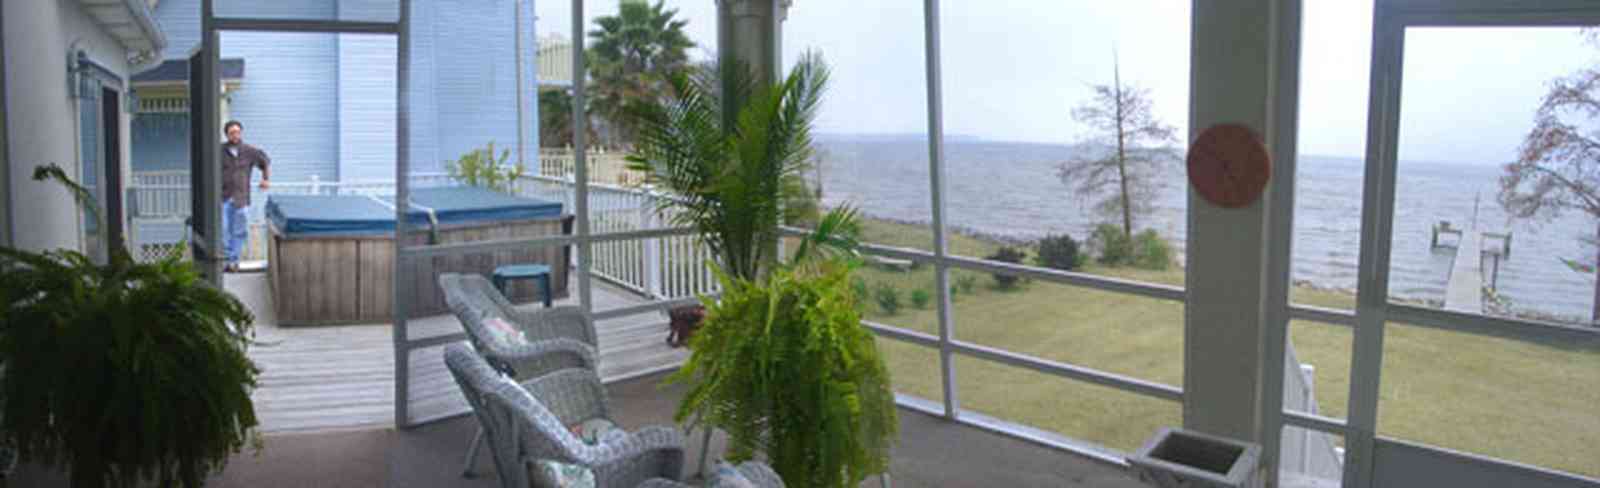 Pace:-Floridatown_06.jpg:  hot tub, screened-in porch, escambia bay, ferns, palm tree